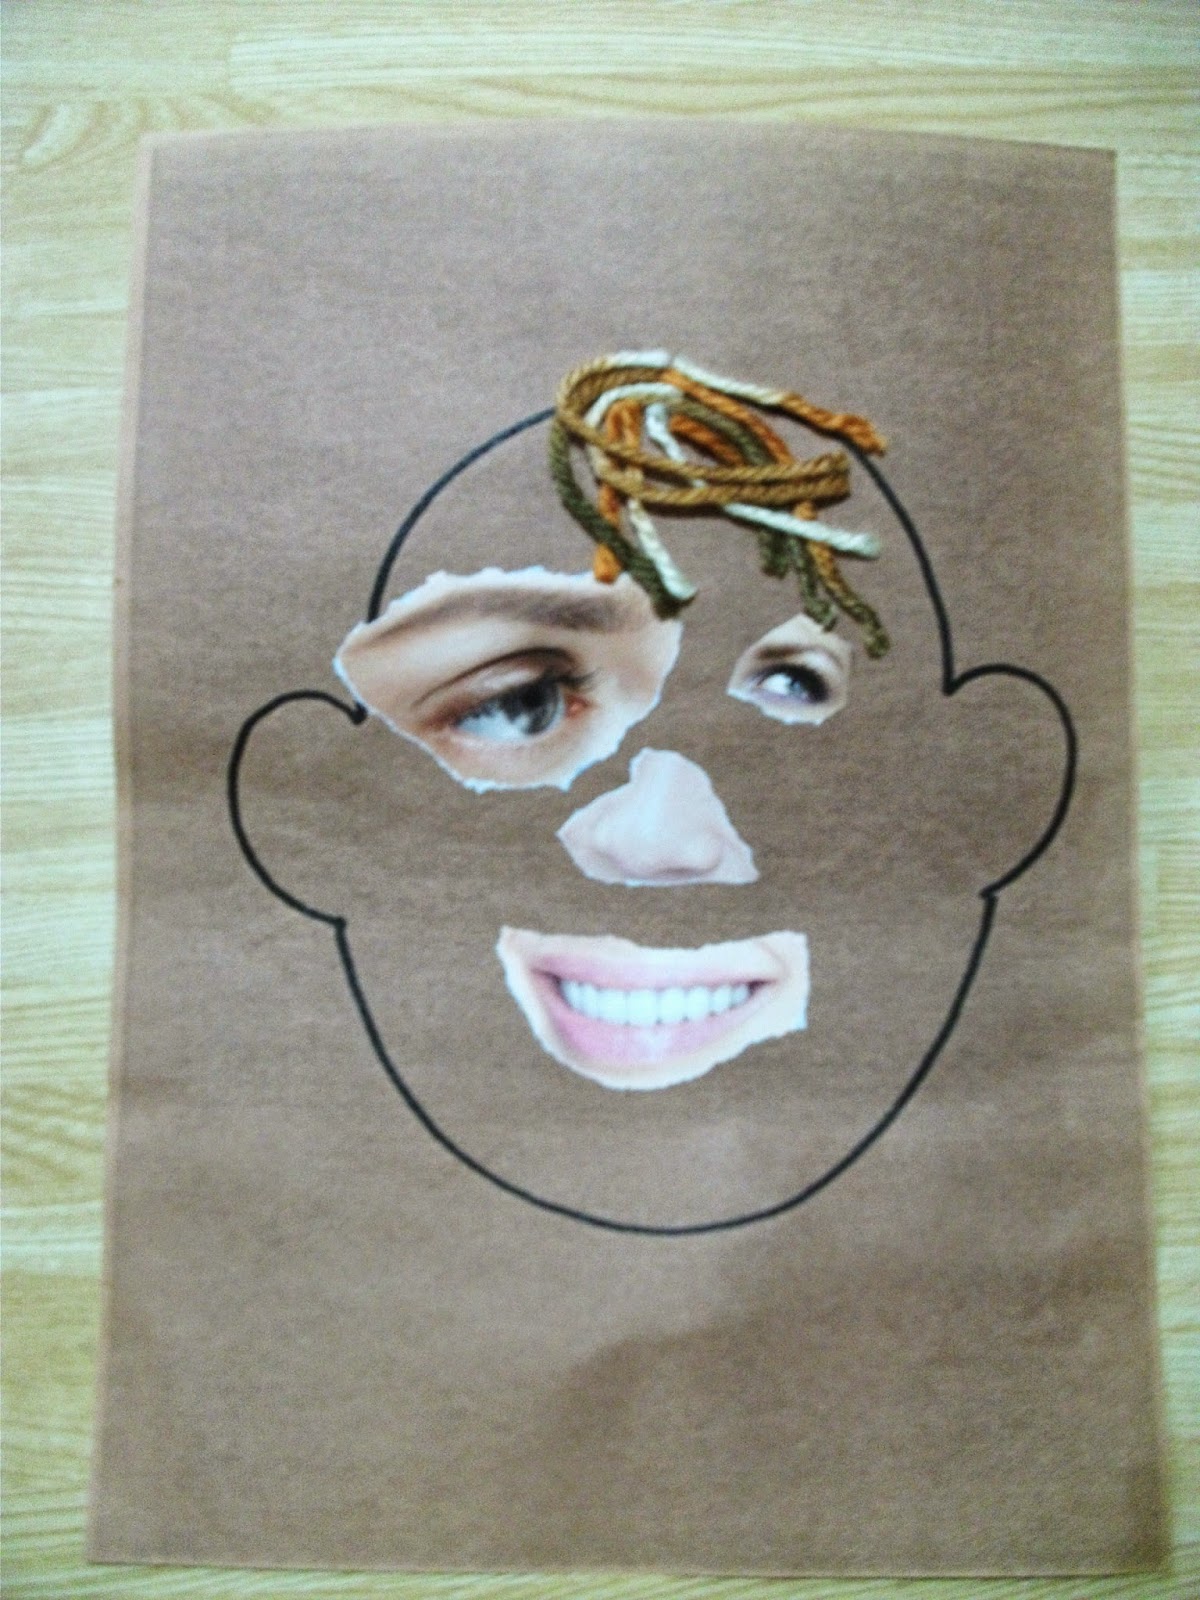 Preschool Crafts for Kids*: Funny Face Collage Craft